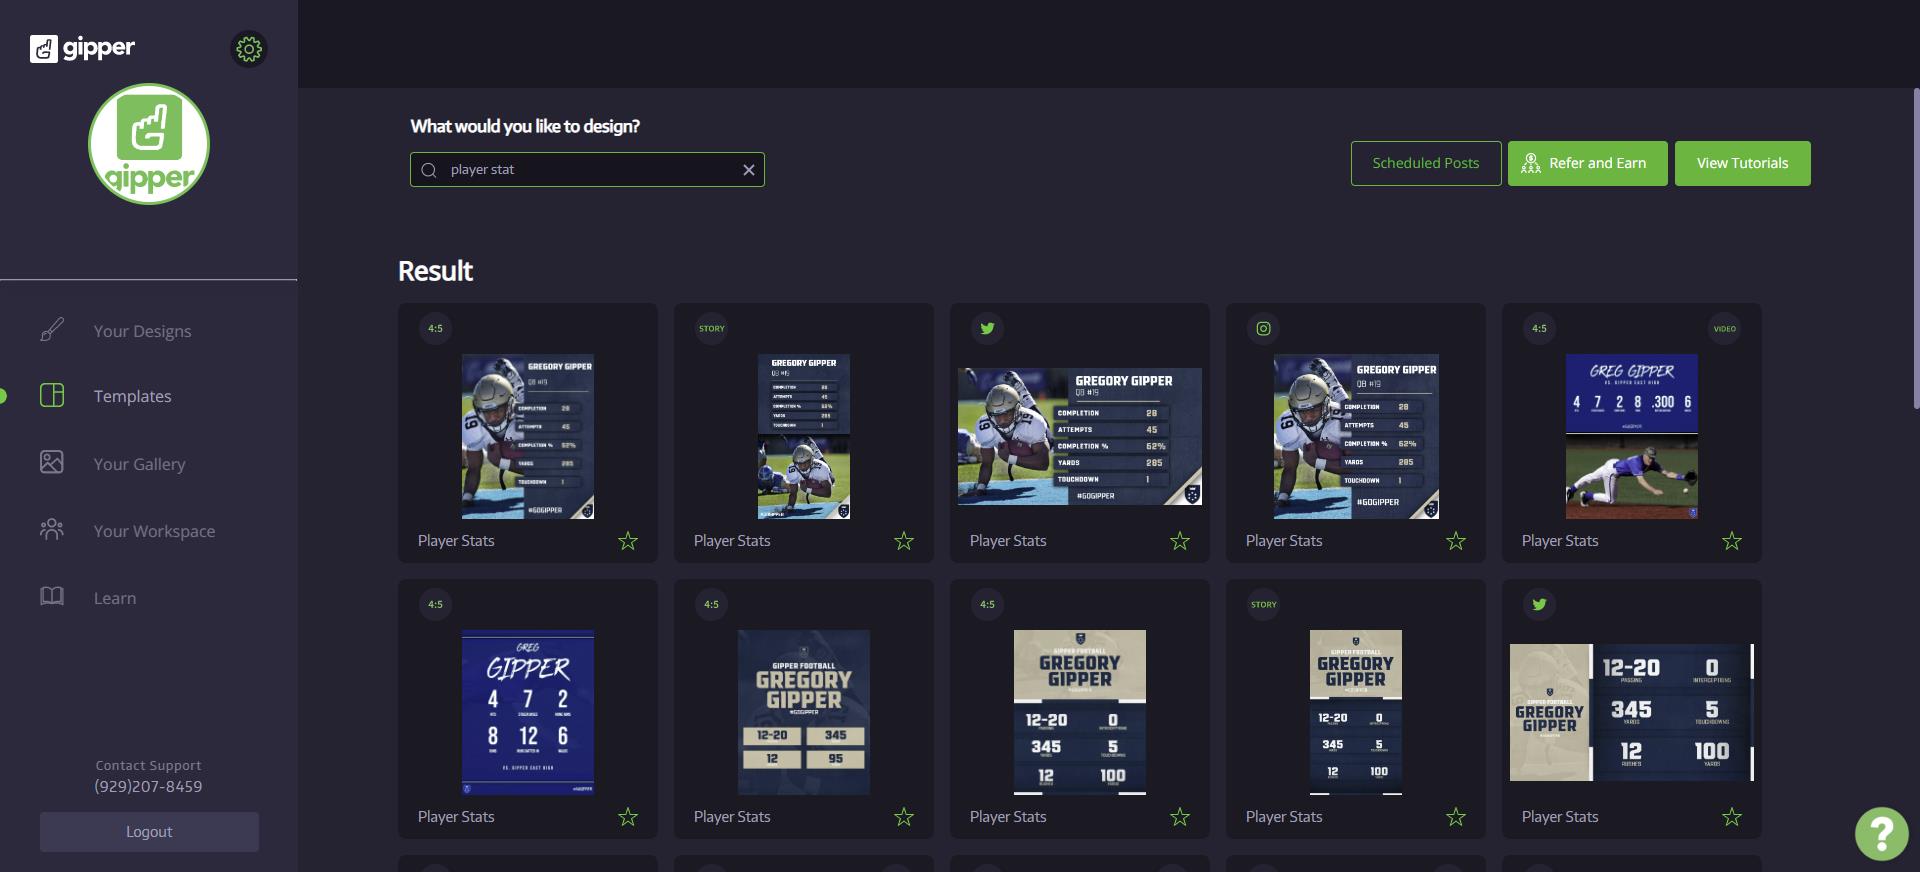 template dashboard showing player & team stat graphic templates for users to choose what they want to create
